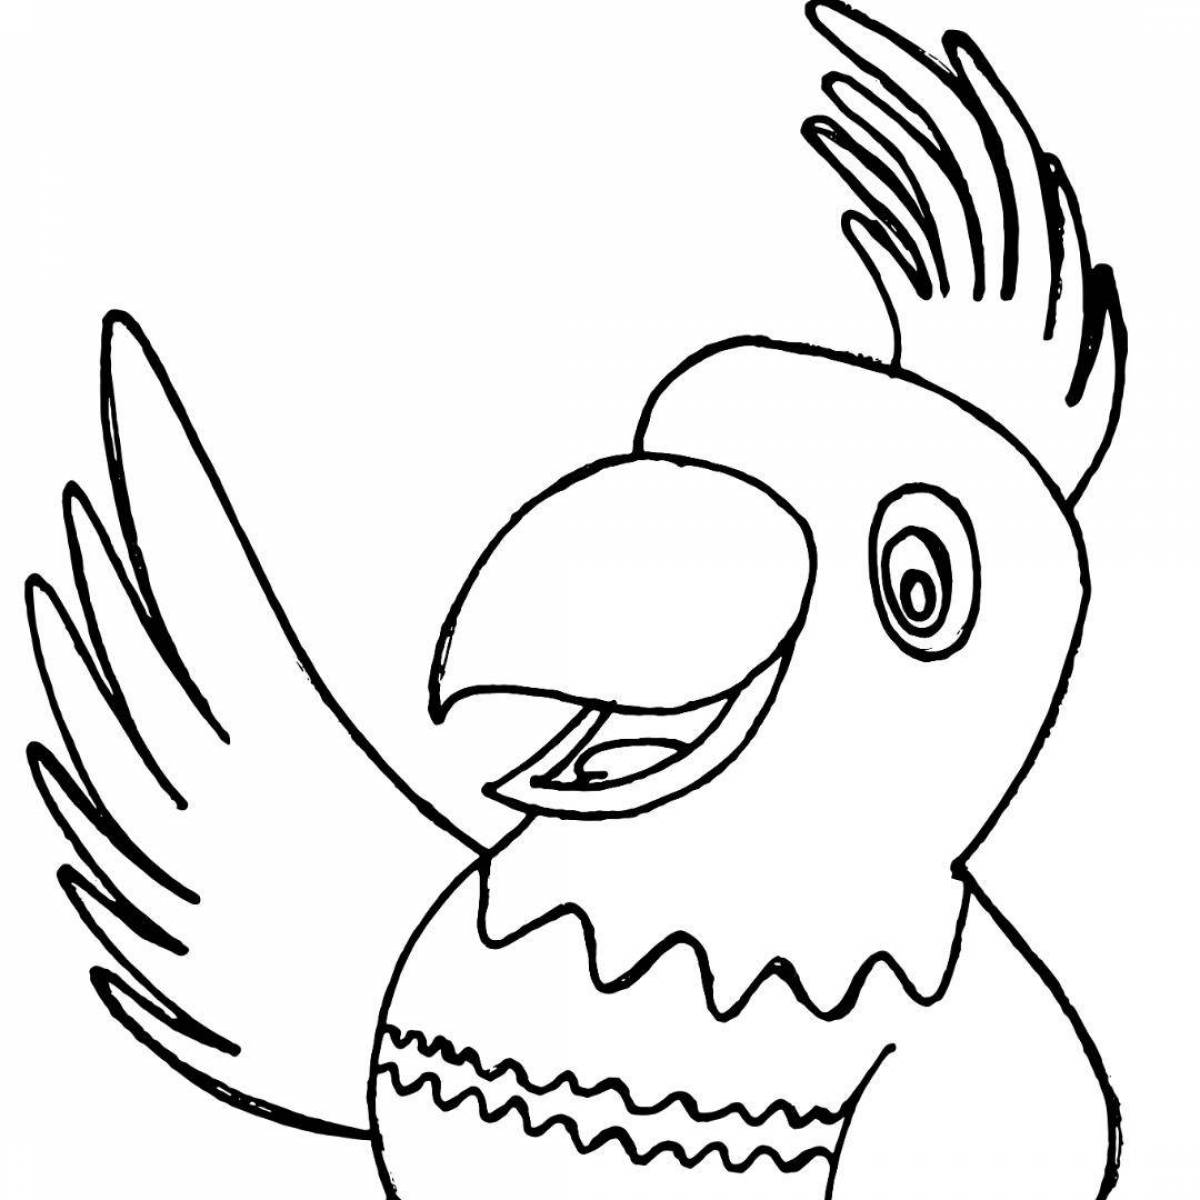 Amazing drawing of a parrot for kids